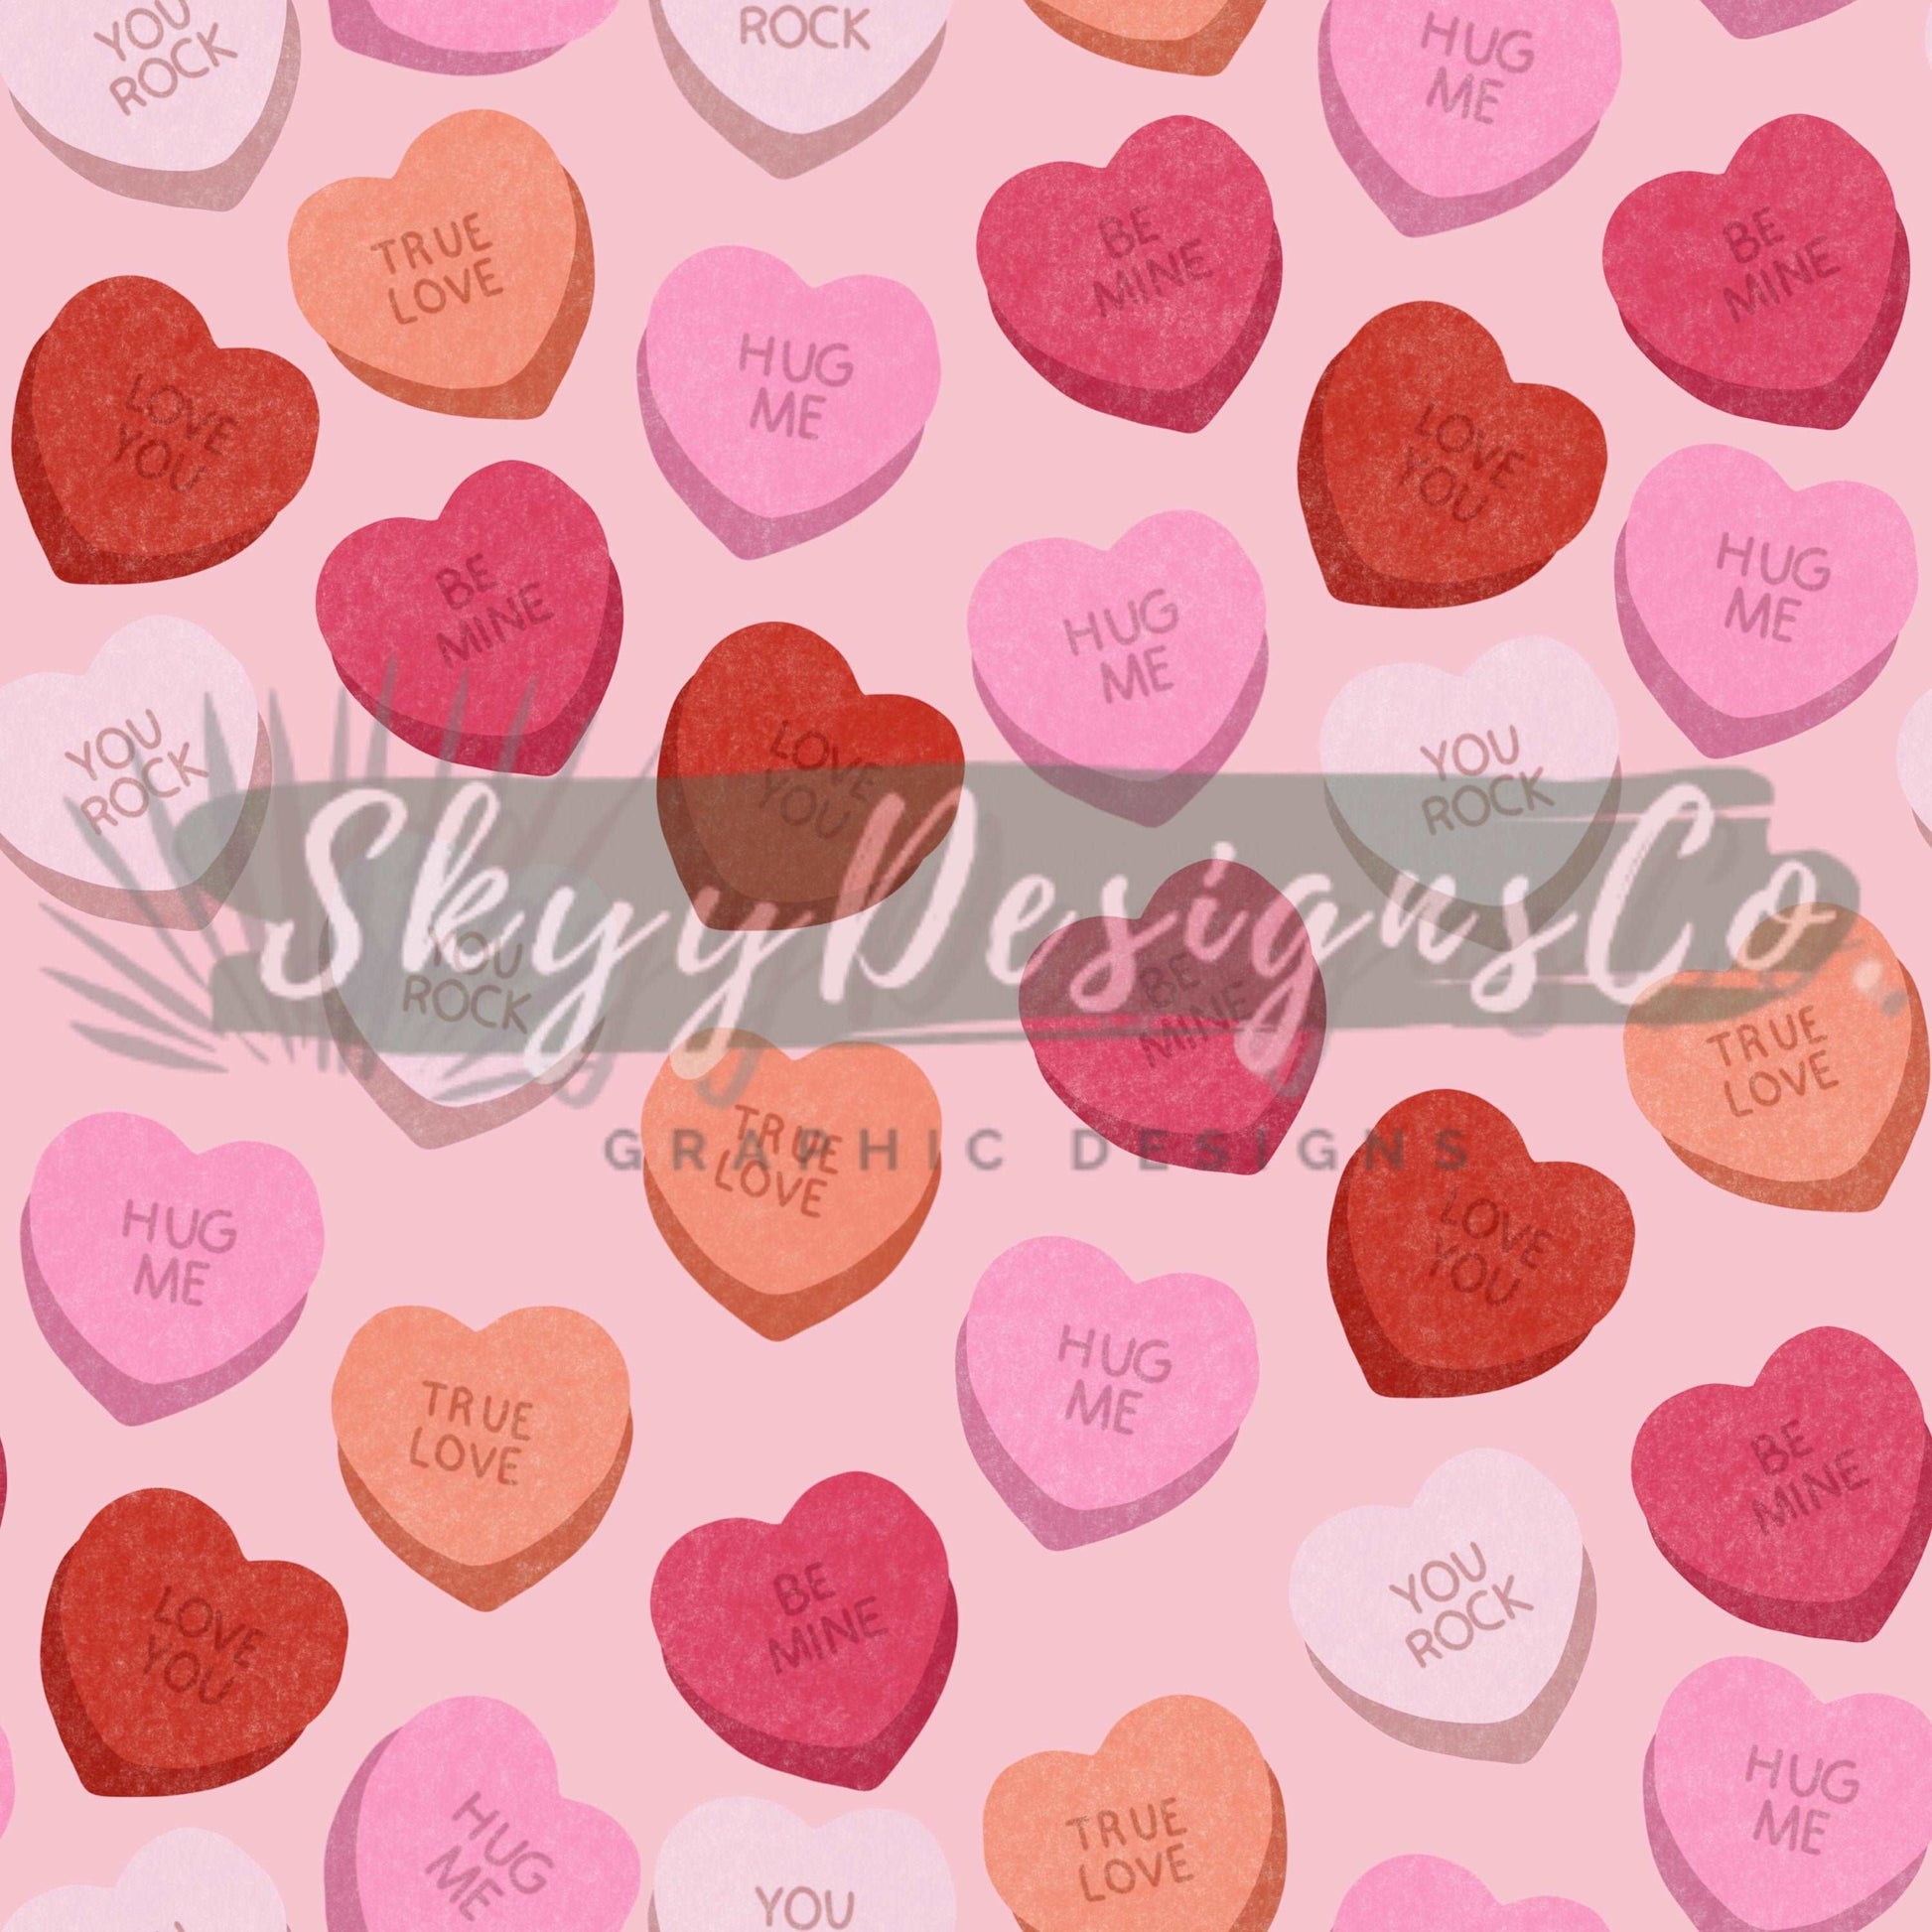 love candies digital seamless pattern for fabrics and wallpapers, Hearts seamless pattern, Candy digital paper, Valentine's pattern - SkyyDesignsCo